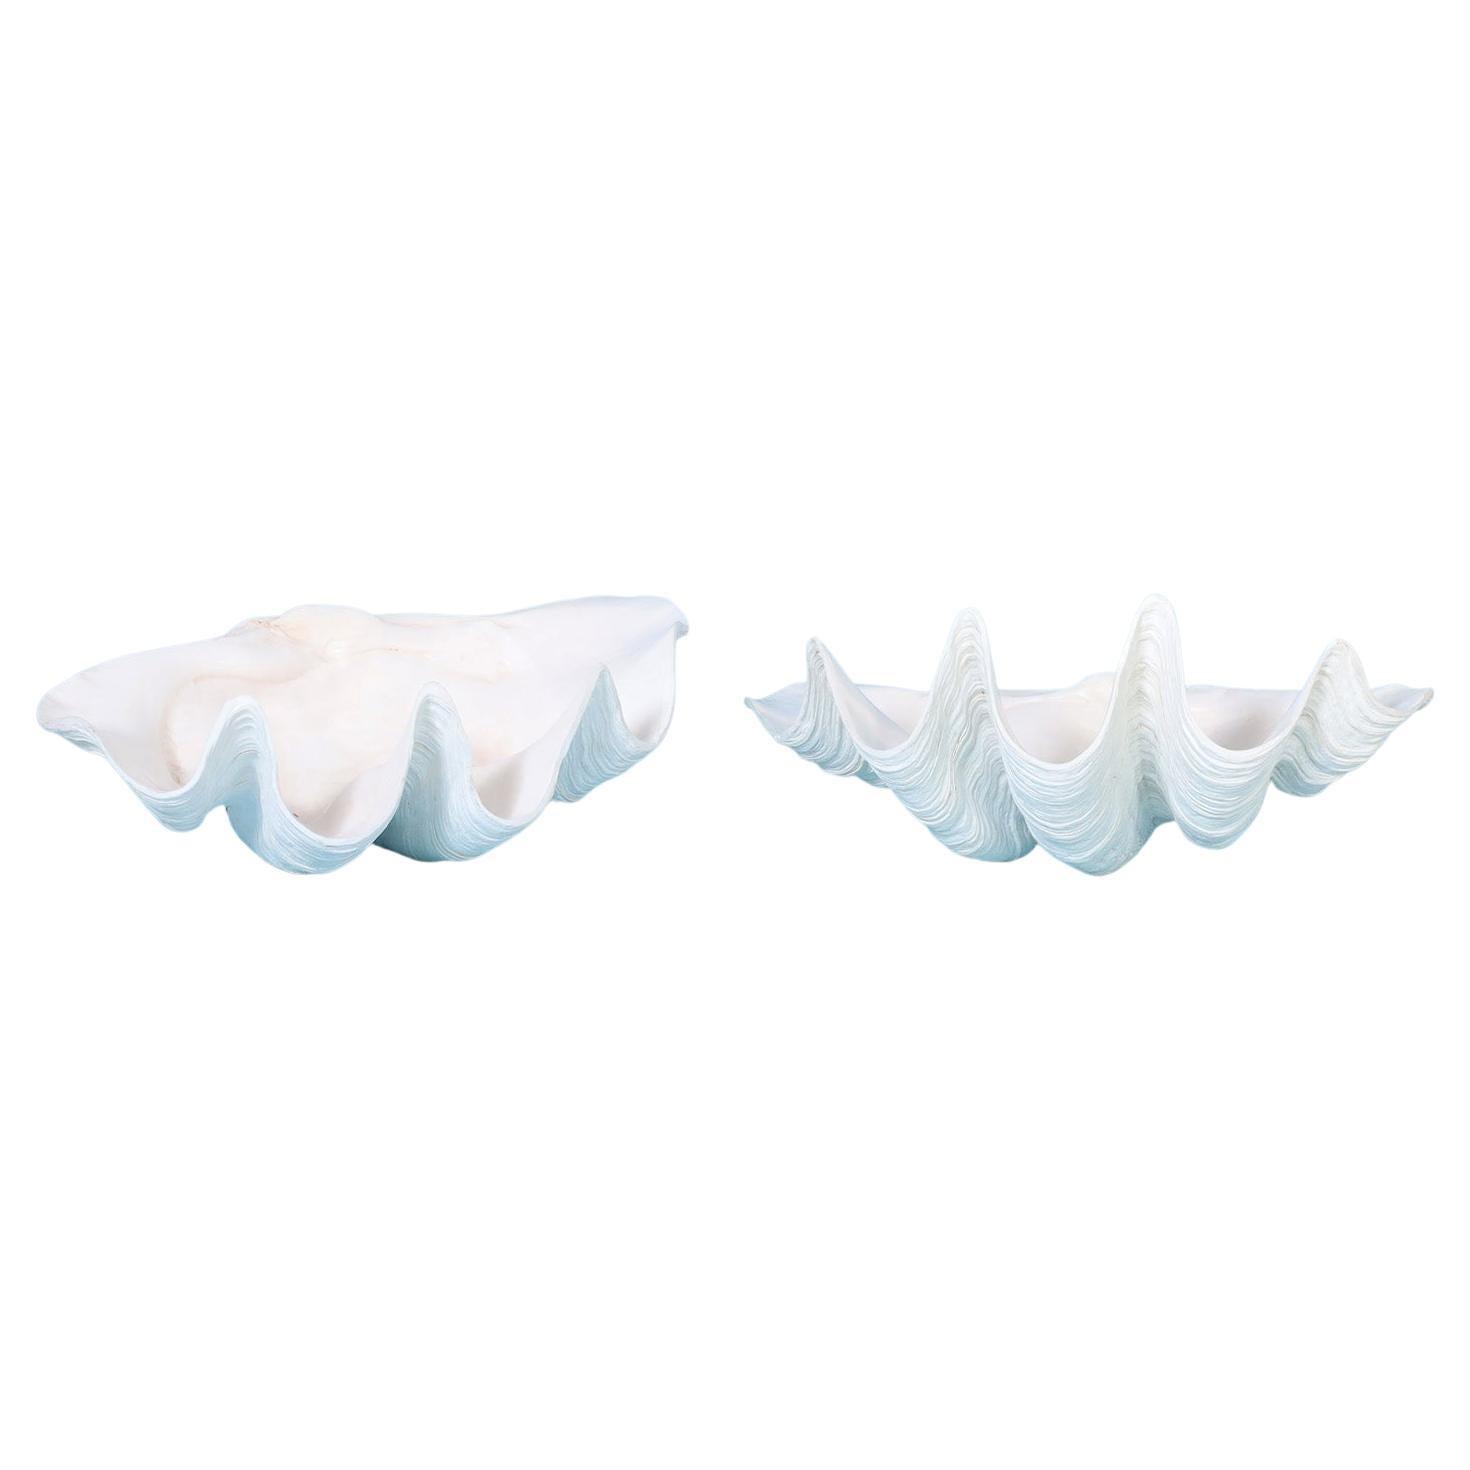 Two Medium Size Clam Shells, Priced Individually 